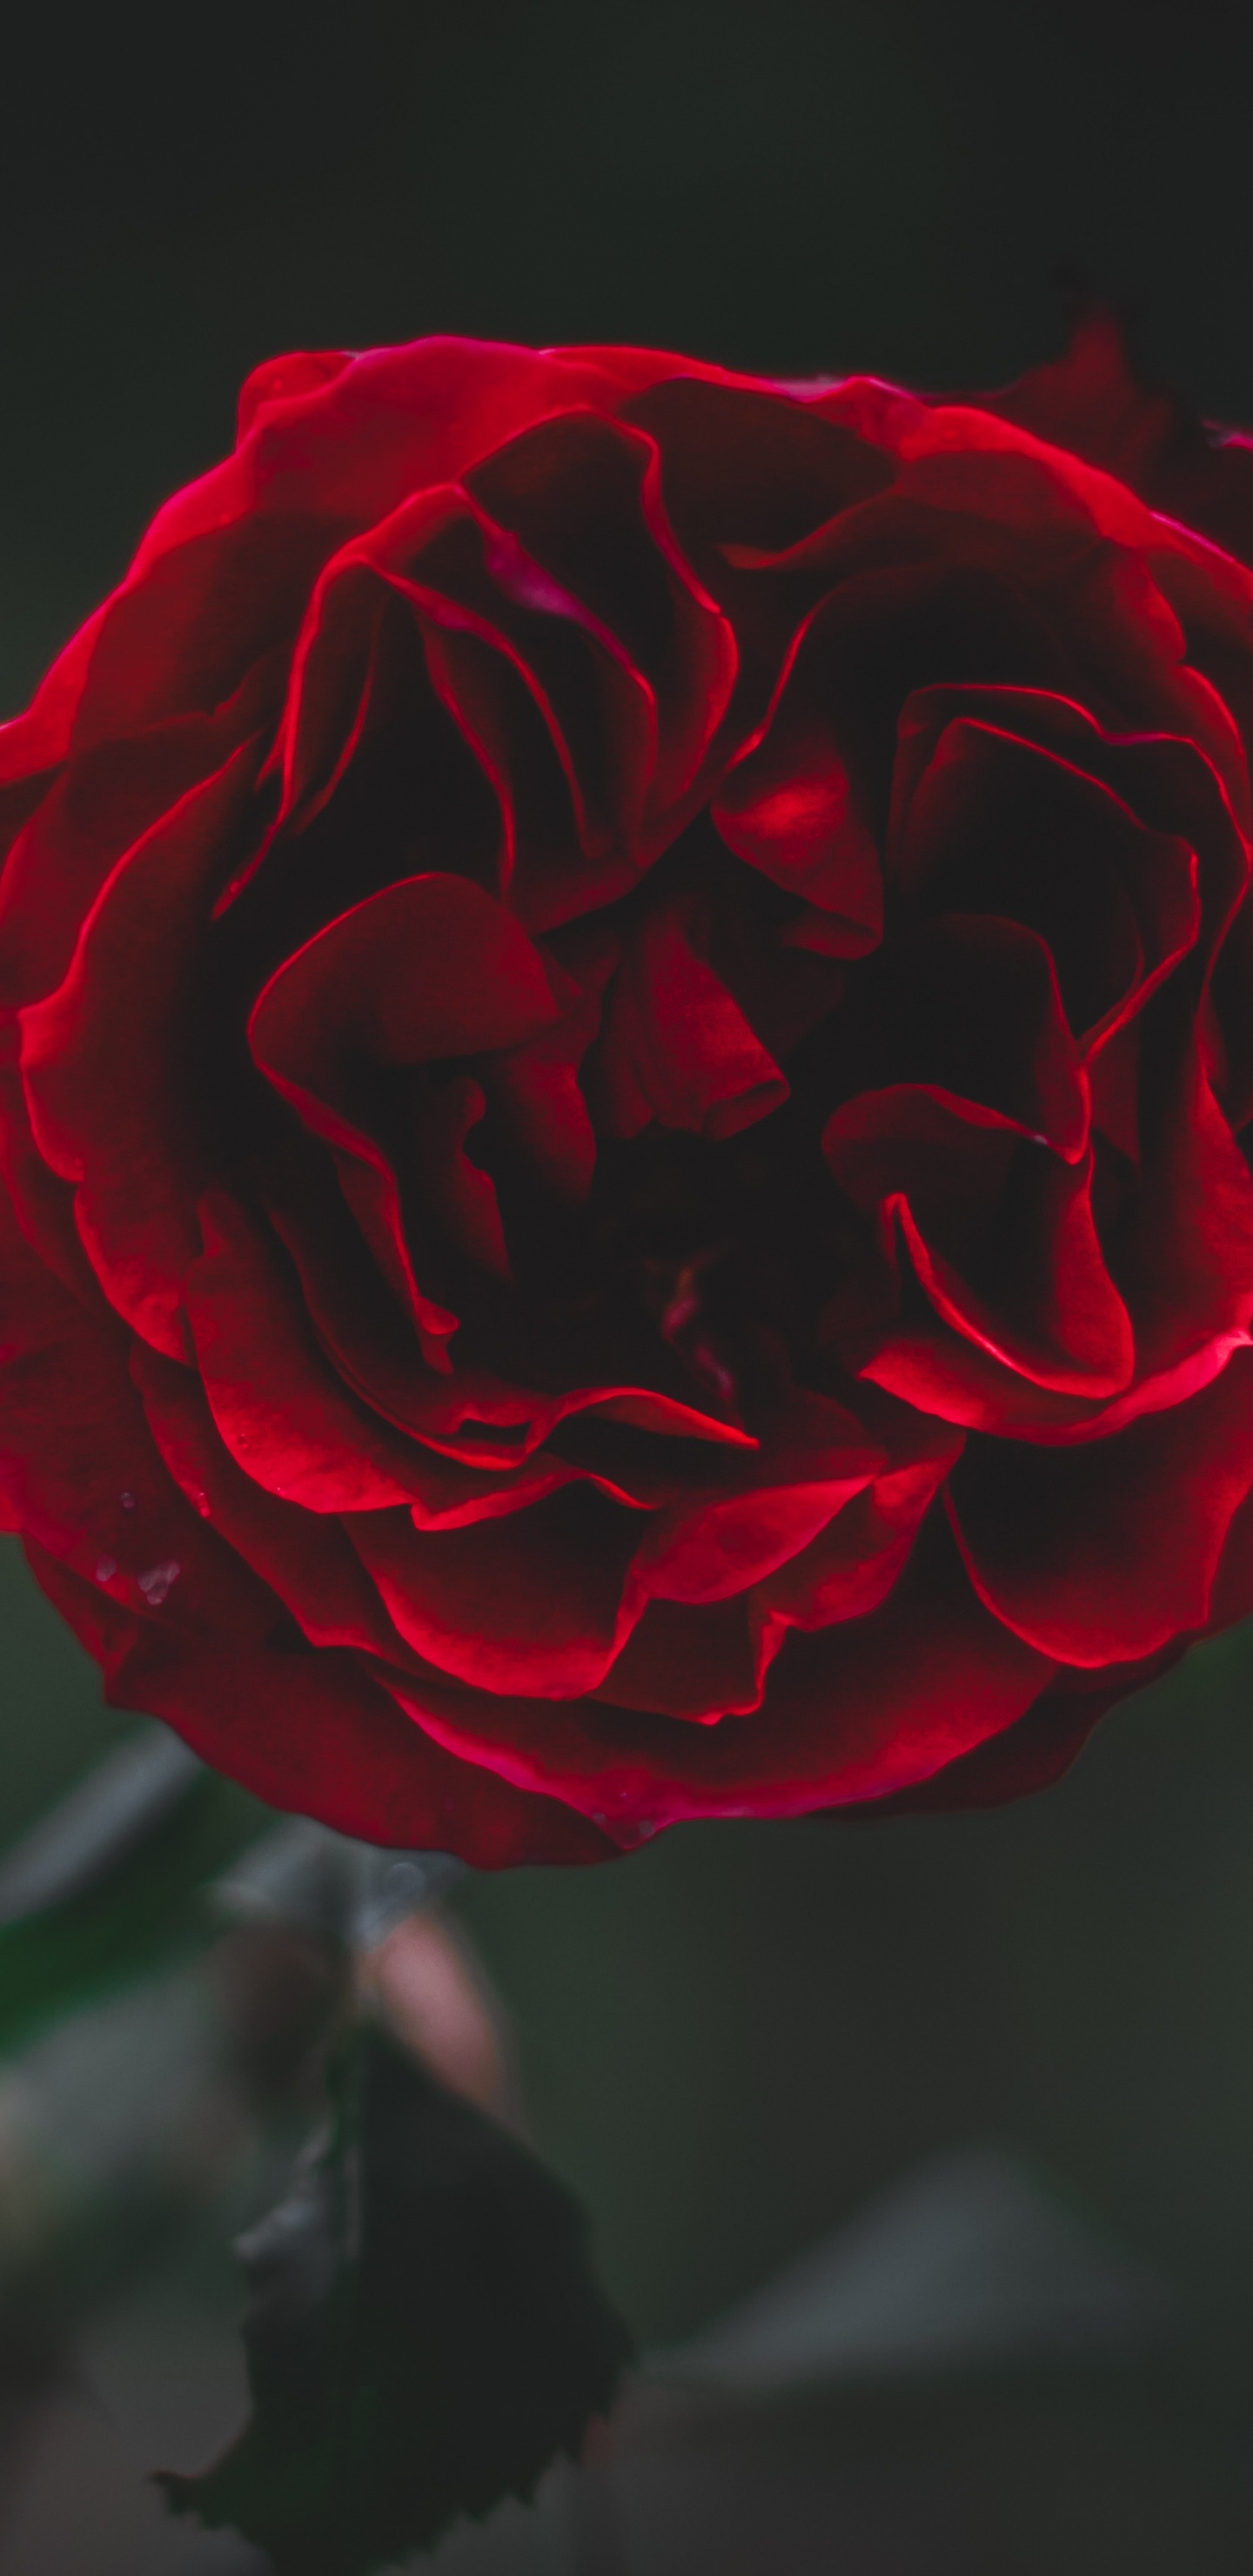 Red Rose in Bloom in Close up Photography. Wallpaper in 1440x2960 Resolution